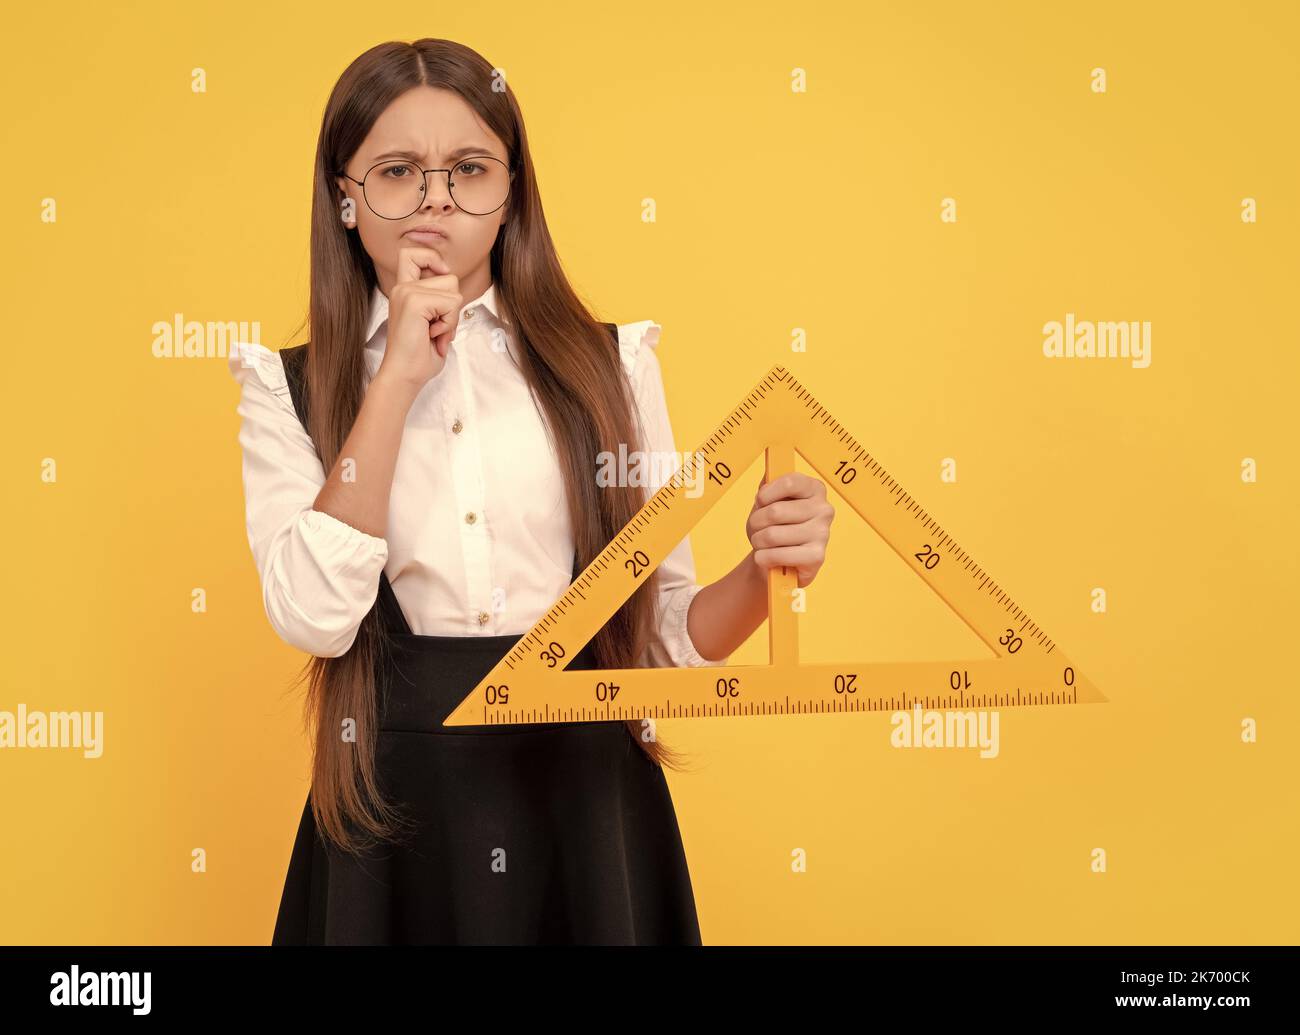 thinking teen girl in uniform and glasses hold mathematics triangle for measuring, measurement. Stock Photo